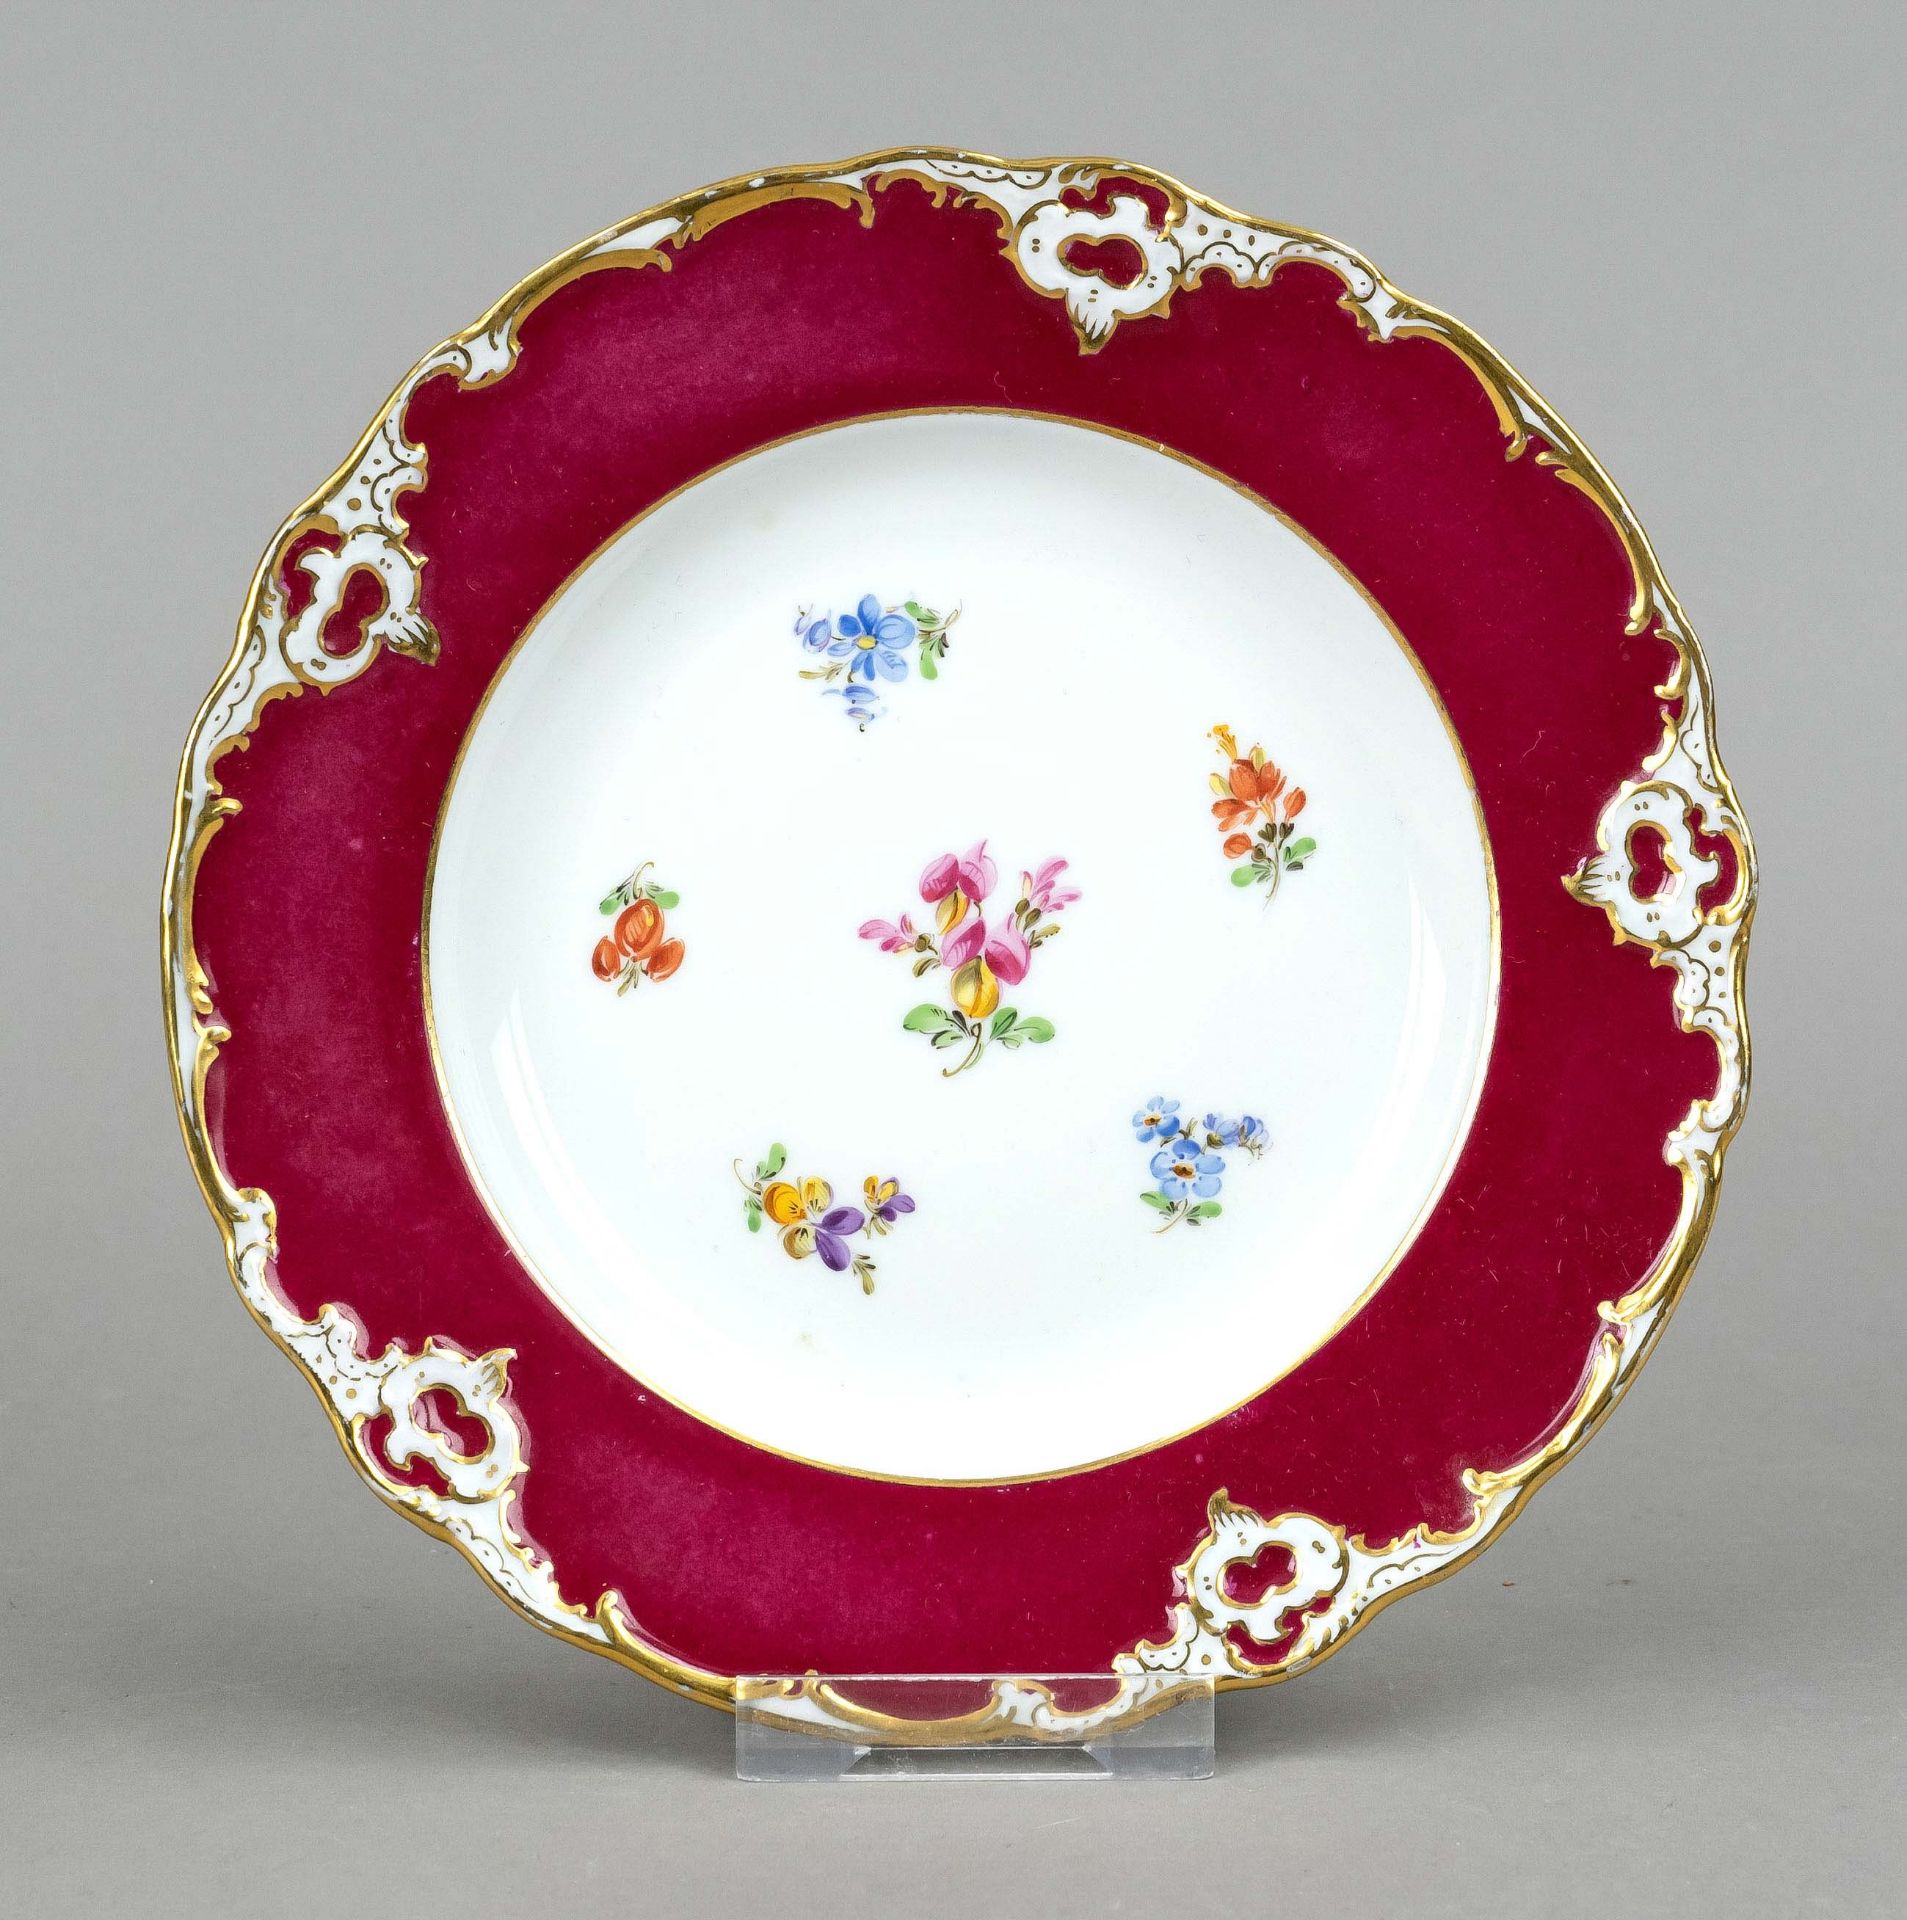 Plate, Meissen, Pfeiffer period (1924-34), 1st choice, mirror with polychrome scattered floral